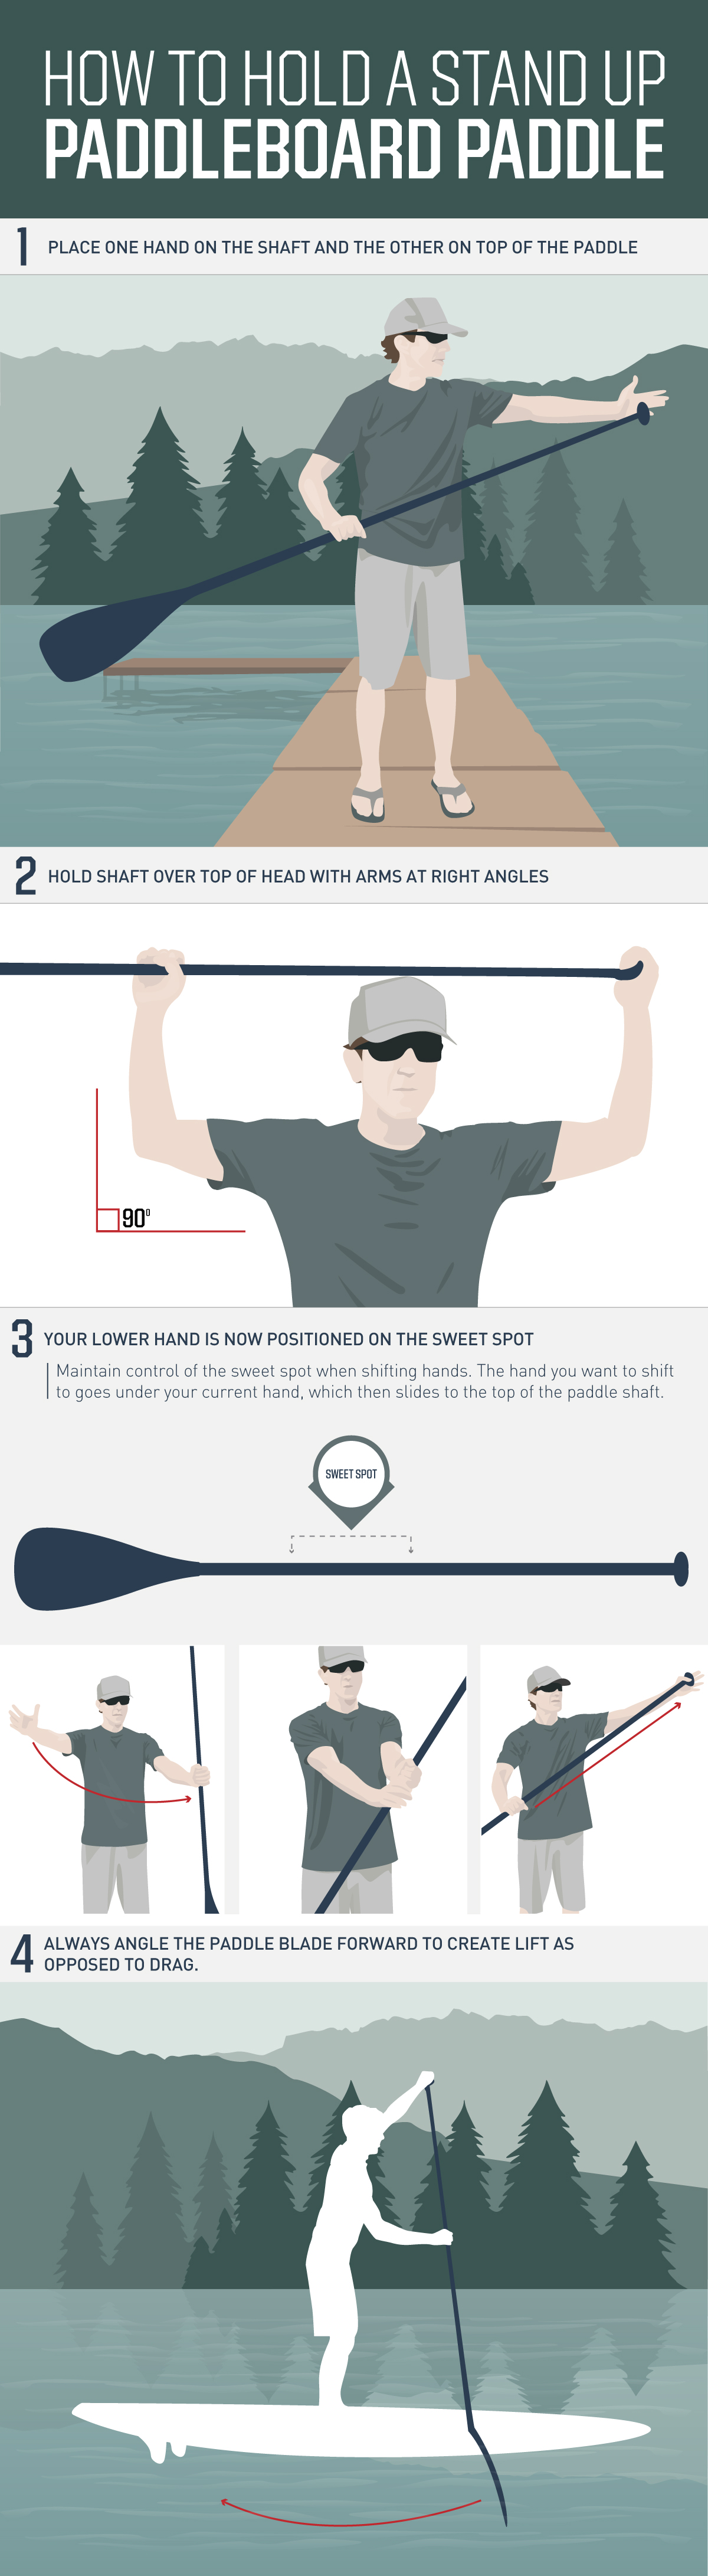 how to hold a sup paddle 